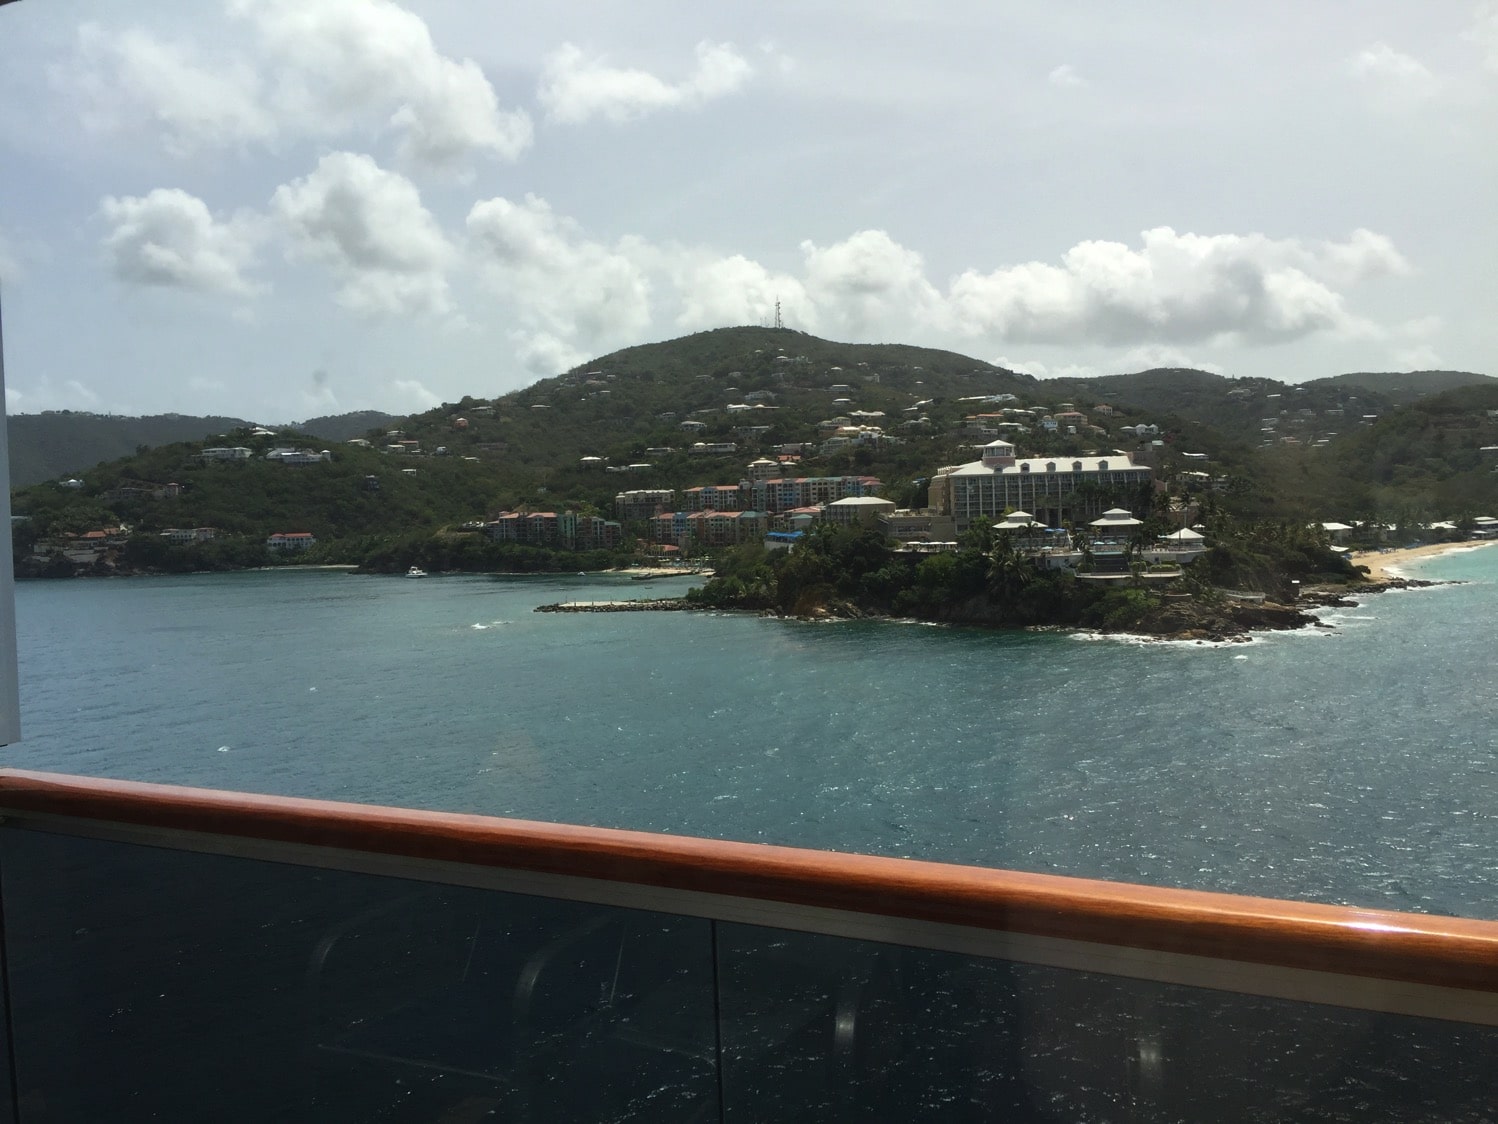 pulling into St. Thomas US Virgin Islands on Carnival Cruise